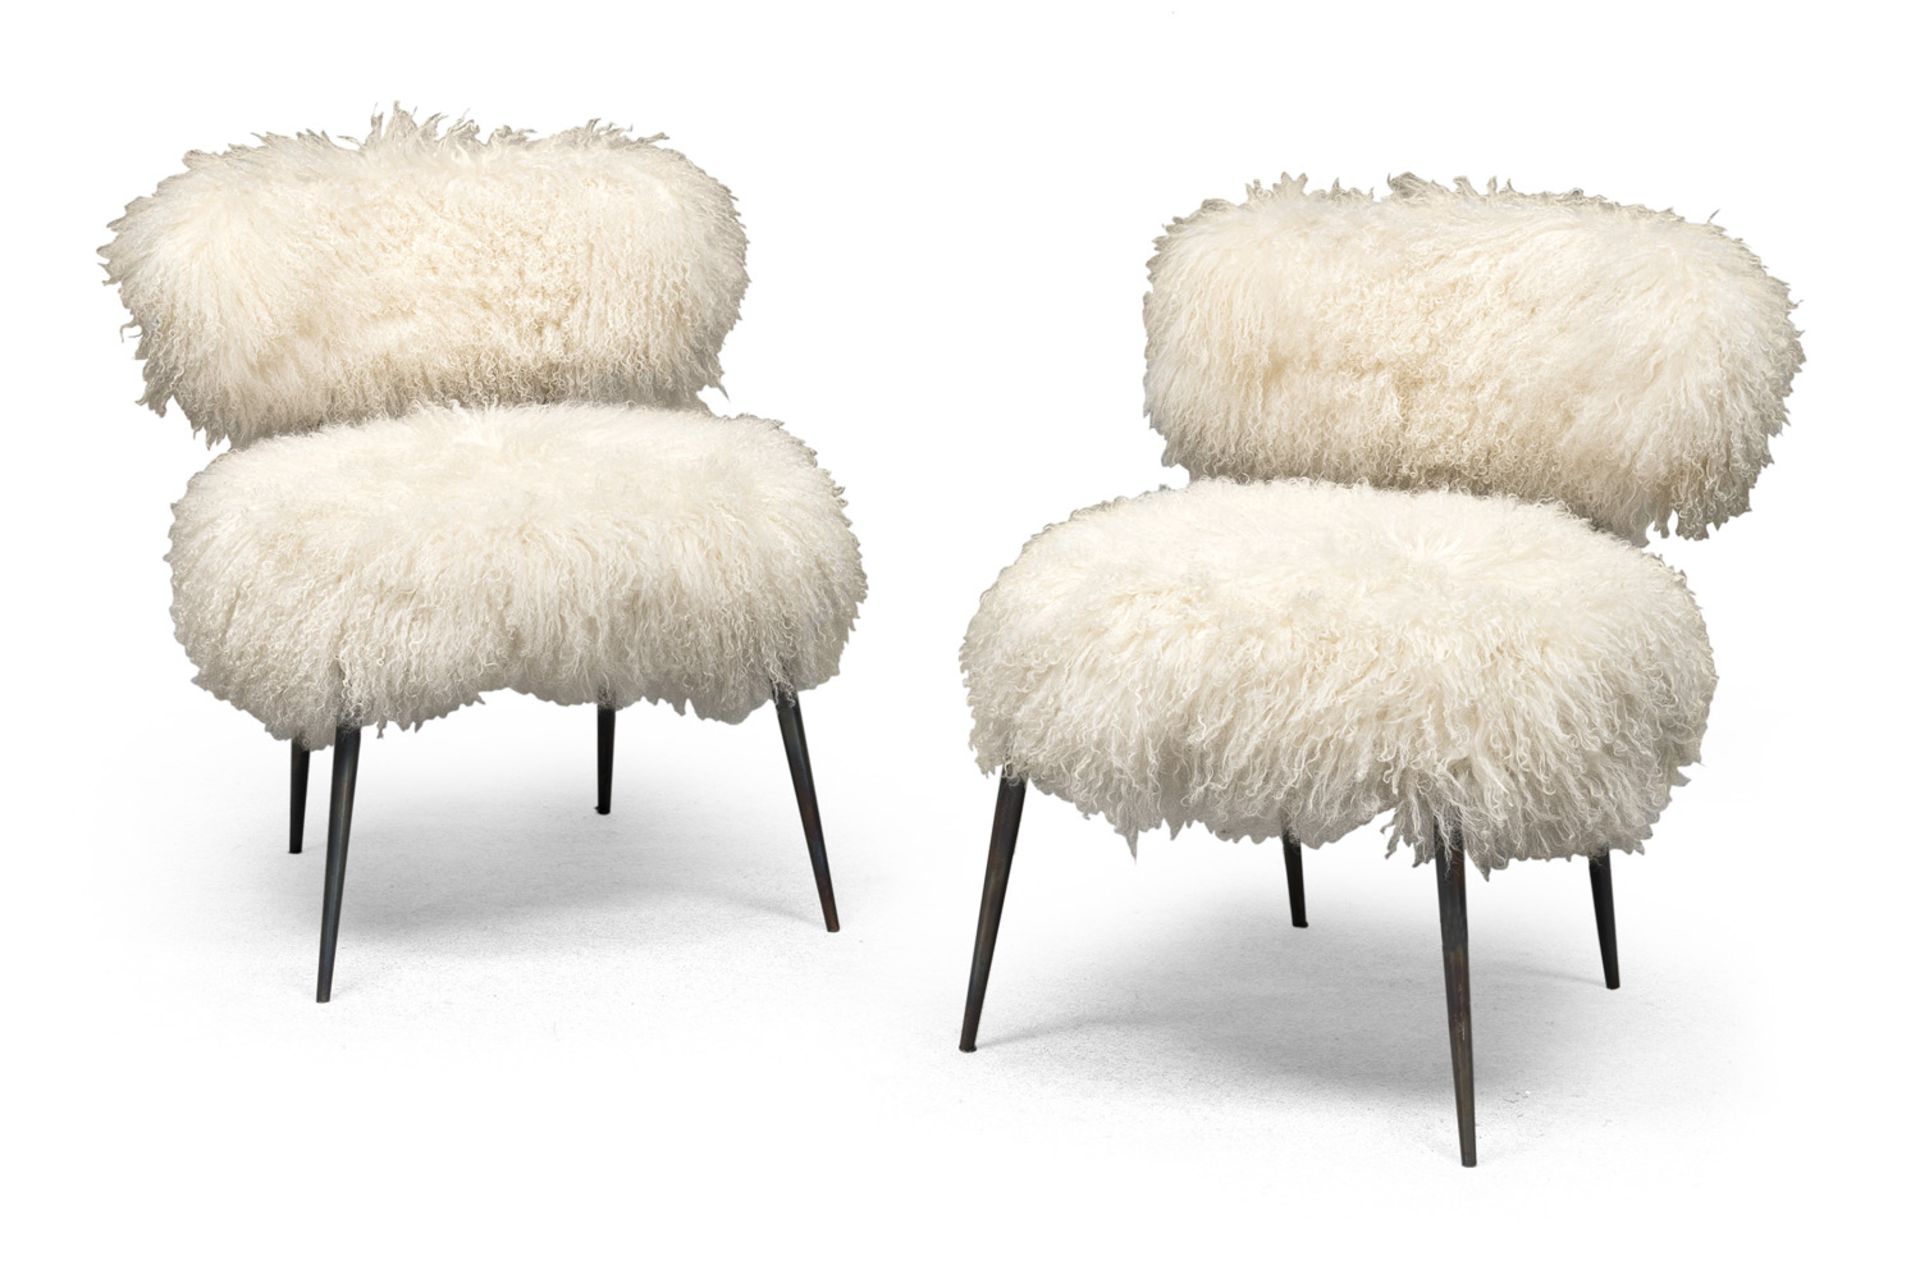 PAIR OF GOAT WOOL ARMCHAIRS